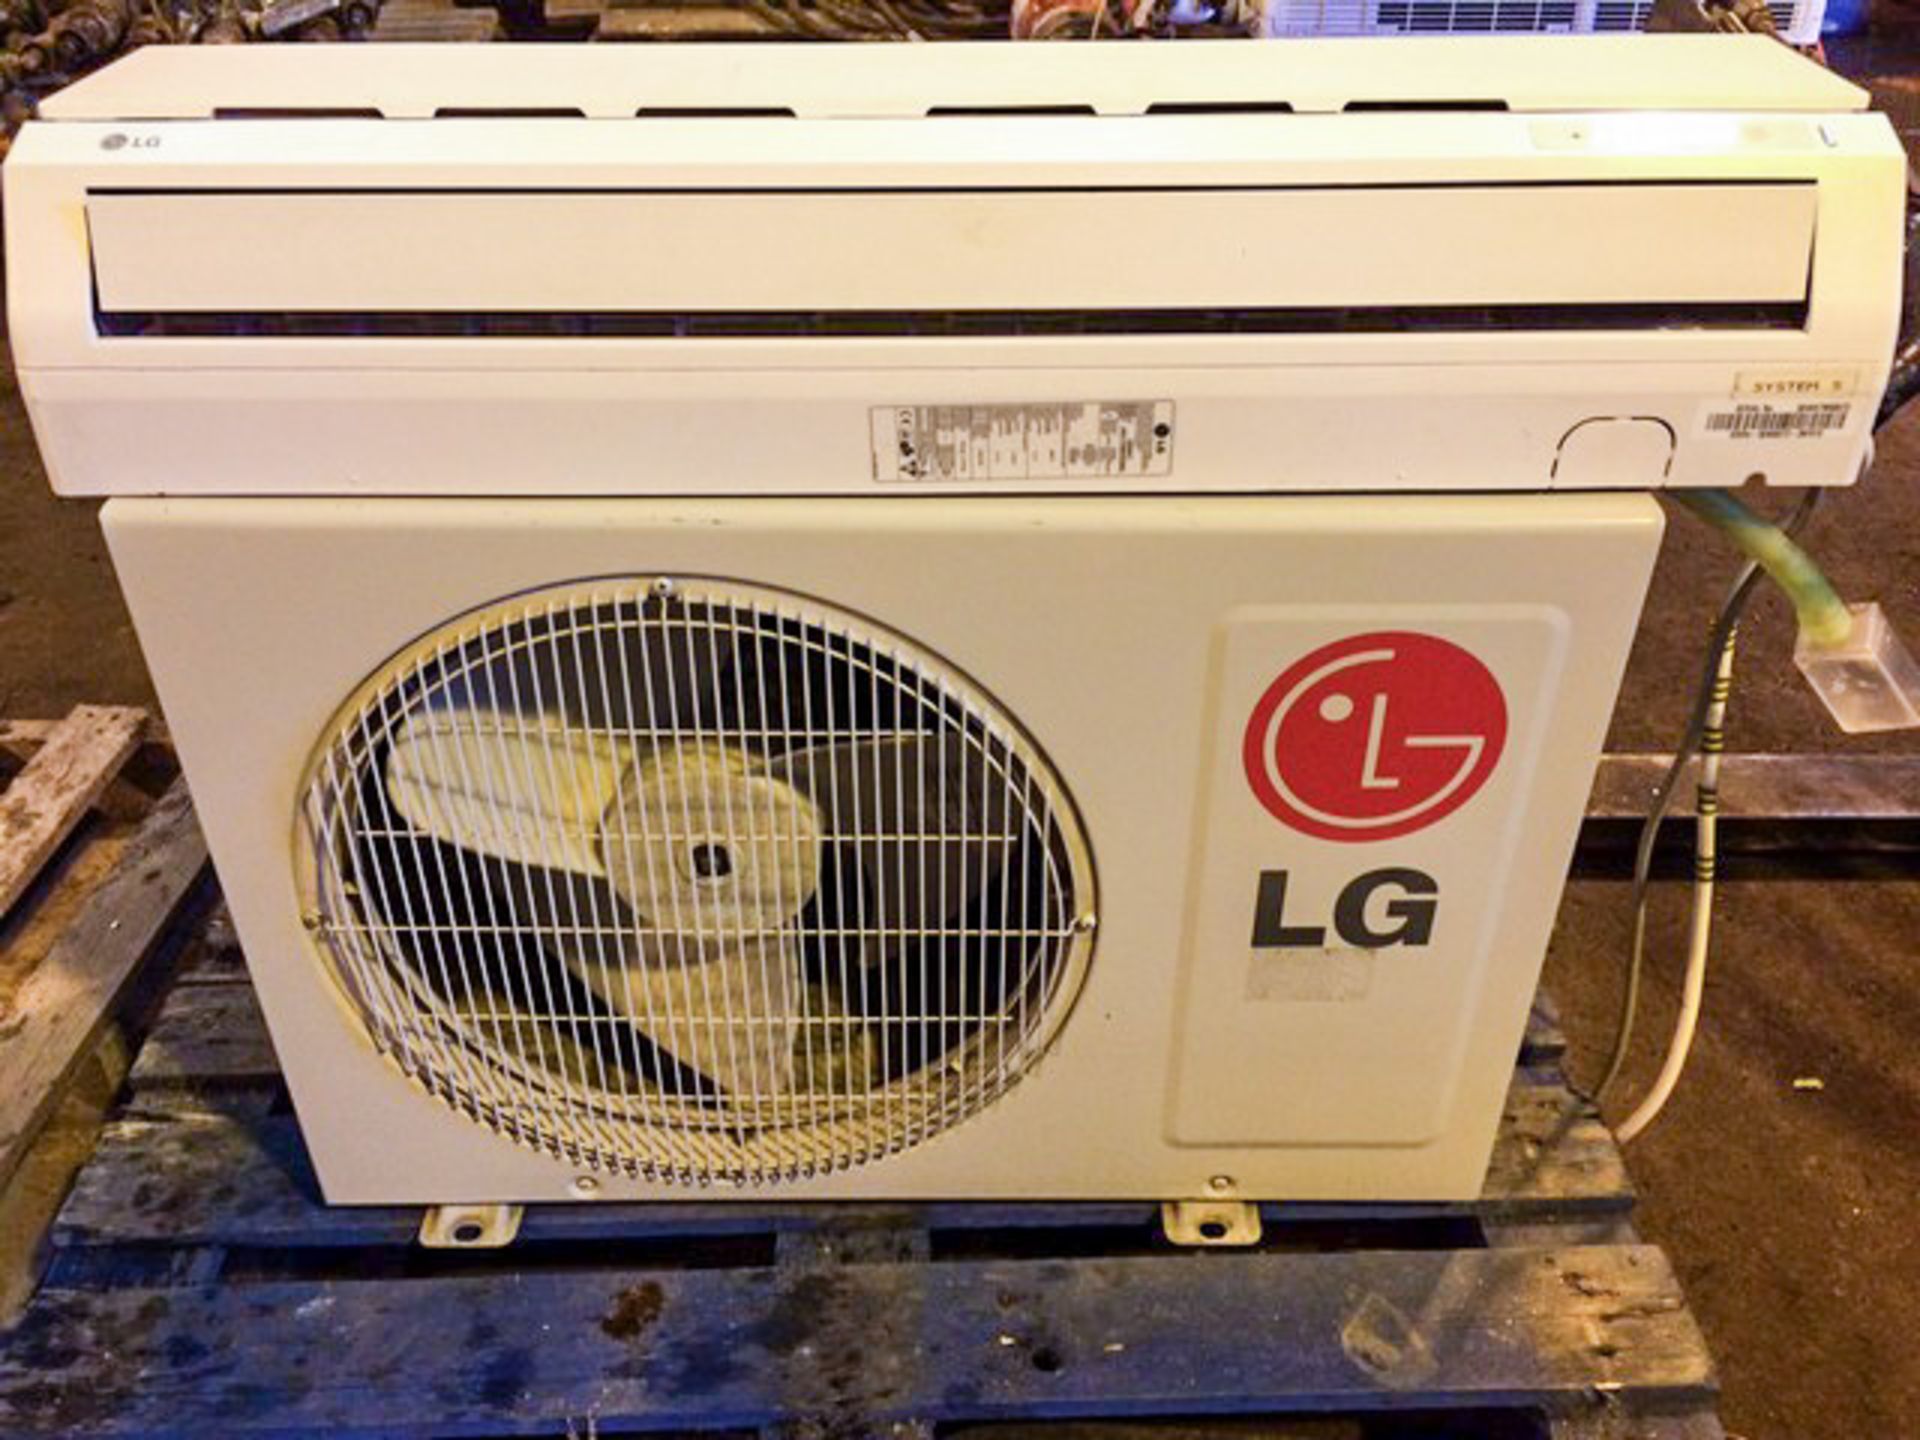 4 X LG AIR CONDITIONING UNITS** SOLD FROM & LOCATED AT BALLACHULISH PH49 4JQ VIEWING BY APPOINTMENT - Image 3 of 6